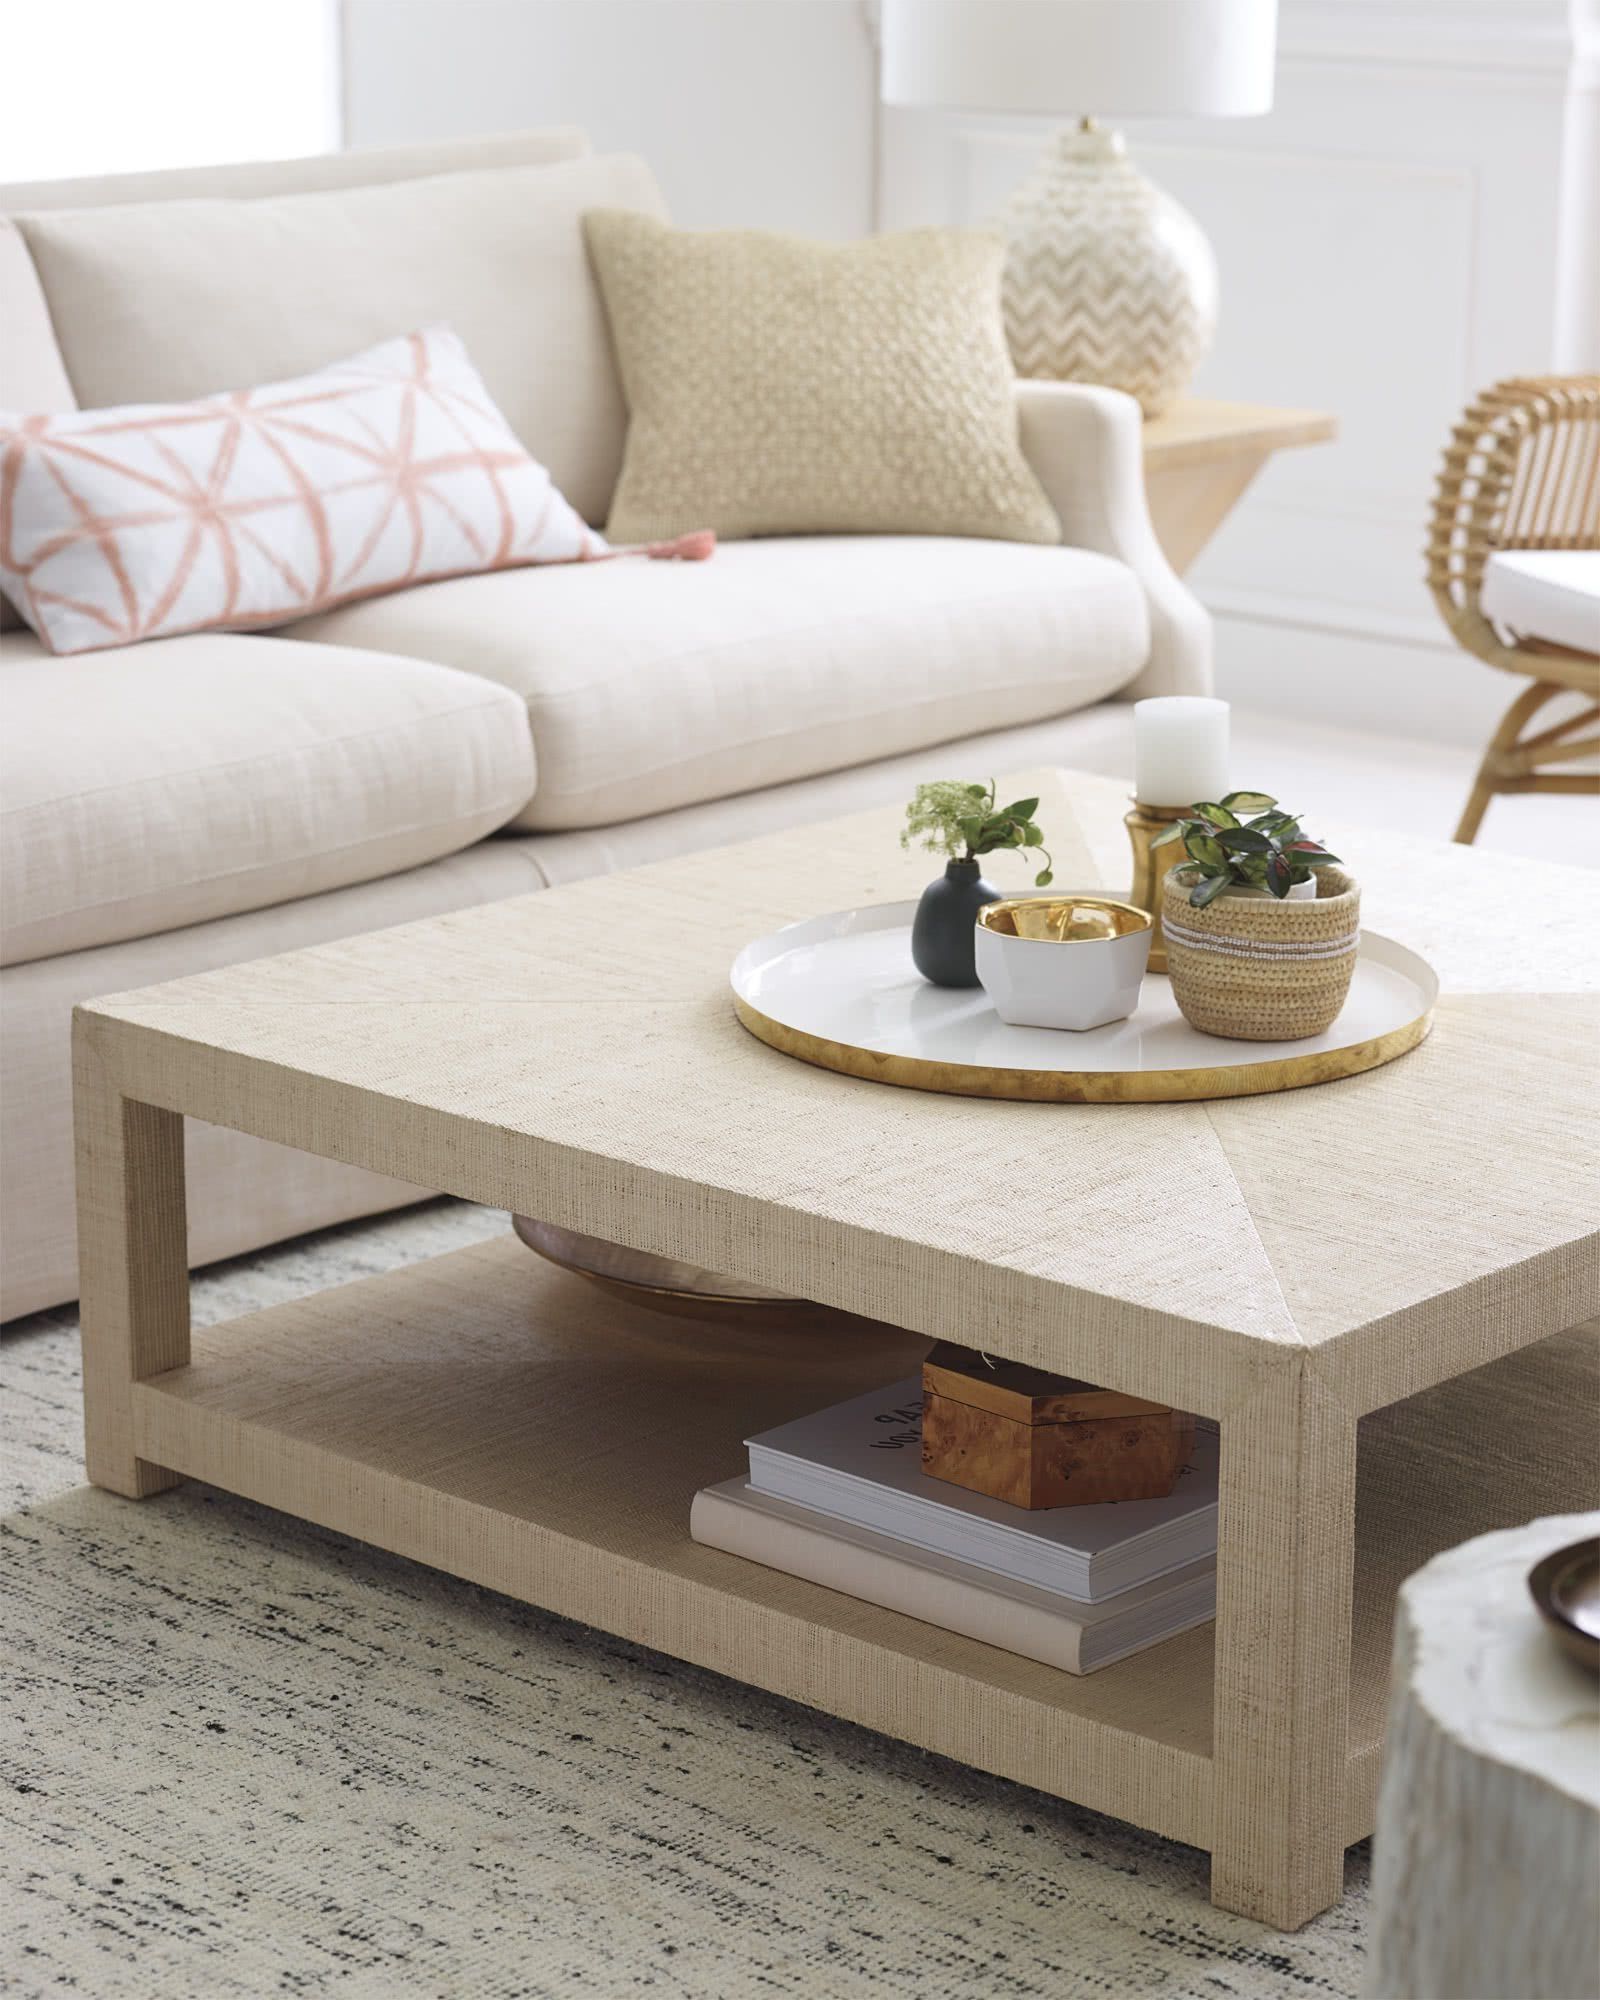 How To Decorate Your Square Coffee Table With Style – Coffee Table Decor Pertaining To Transitional Square Coffee Tables (View 13 of 20)